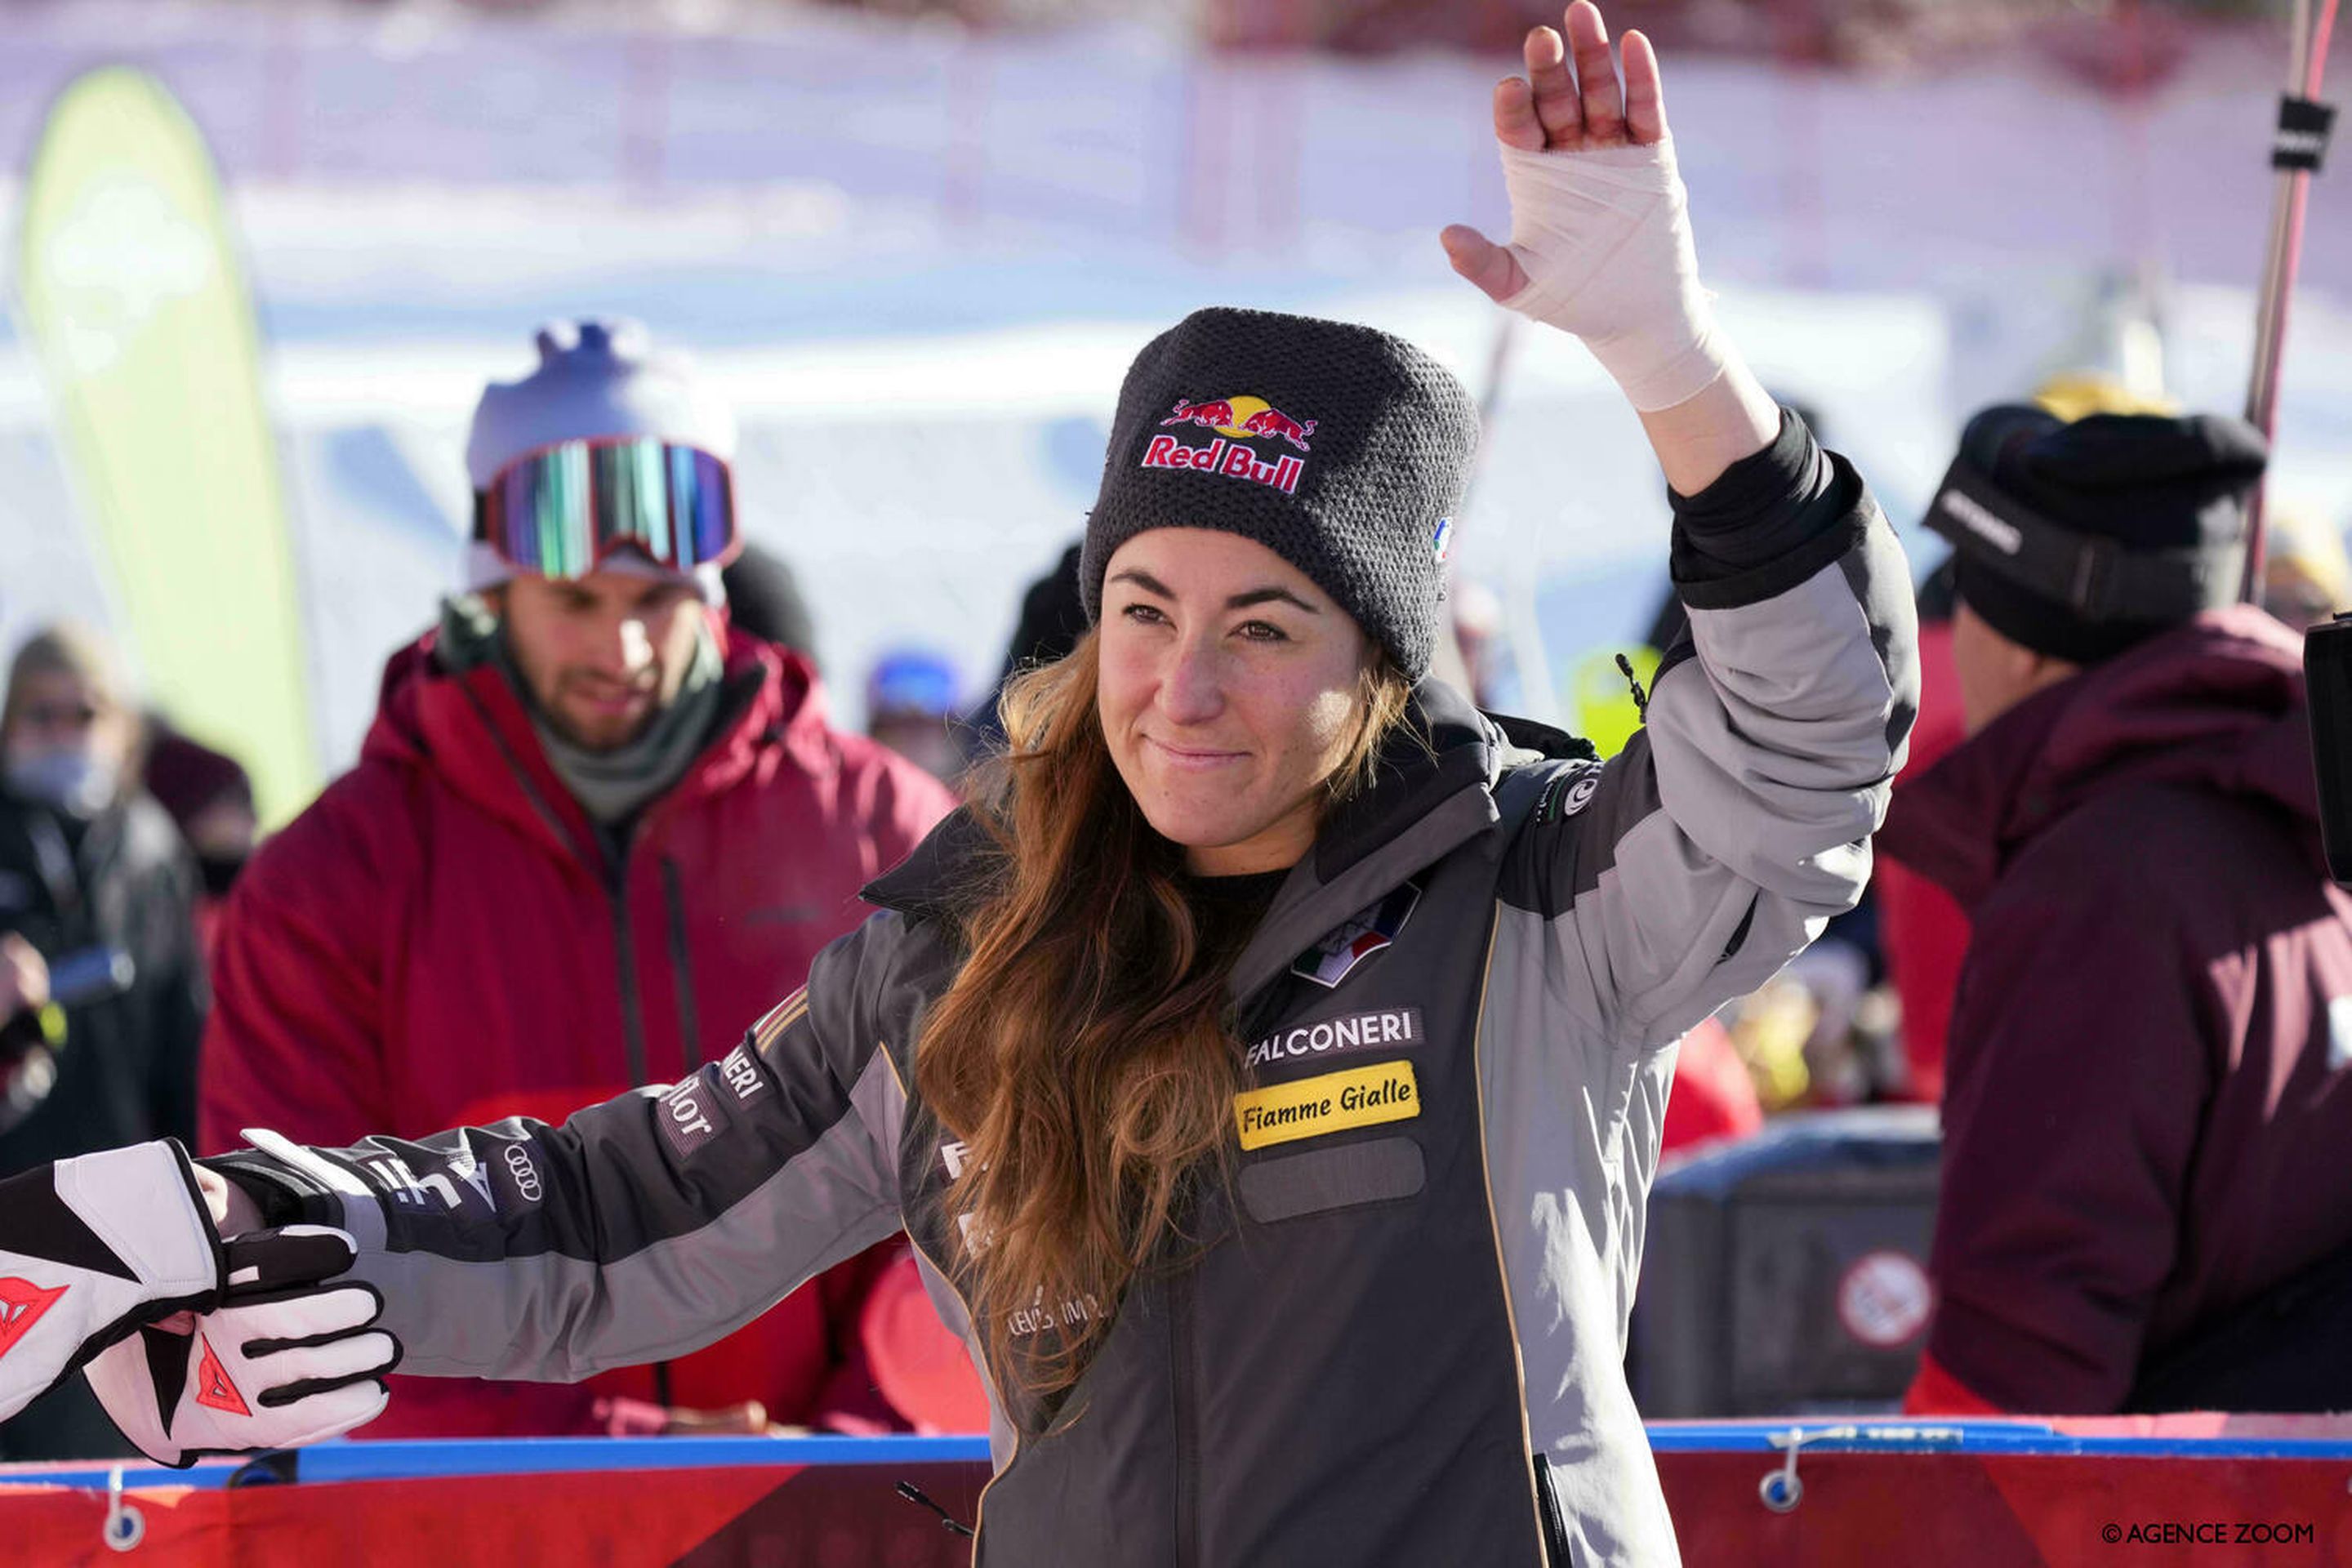 Sofia Goggia waves with her bandaged, broken hand after winning Saturday's downhill (Agence Zoom)